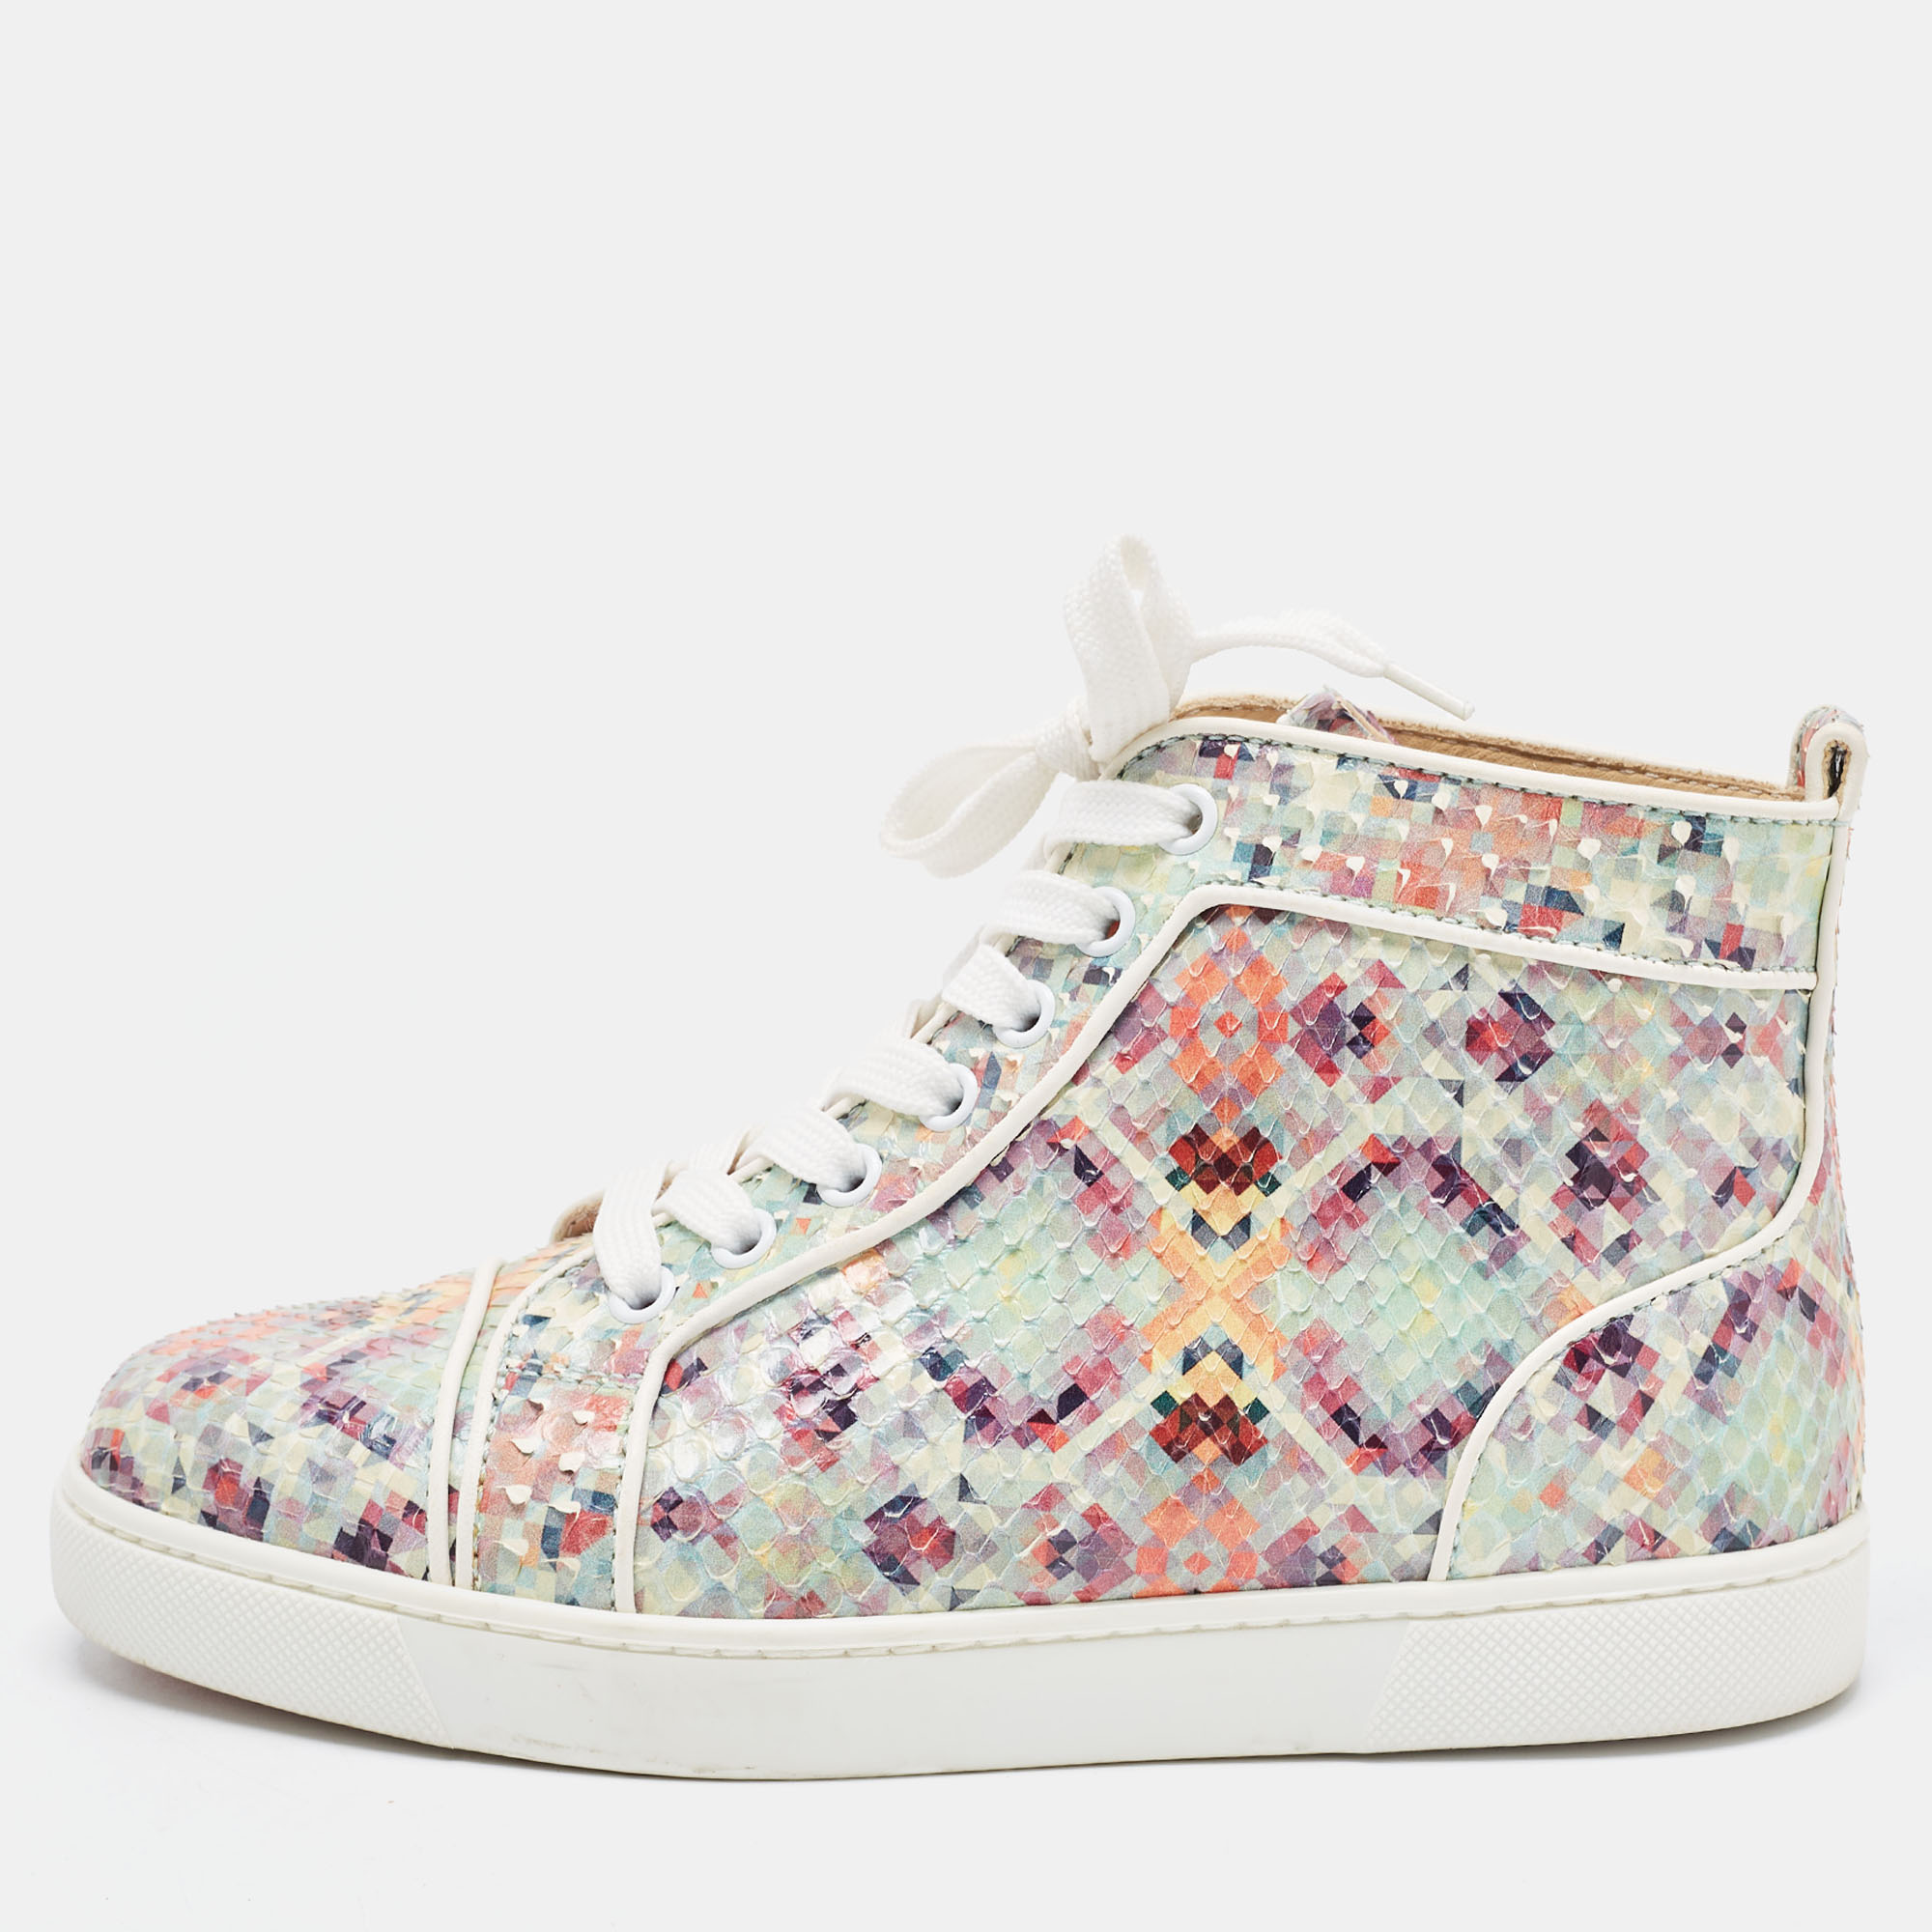 Pre-owned Christian Louboutin Green Pixel Print Embossed Snakeskin Louis High Top Sneakers Size 36